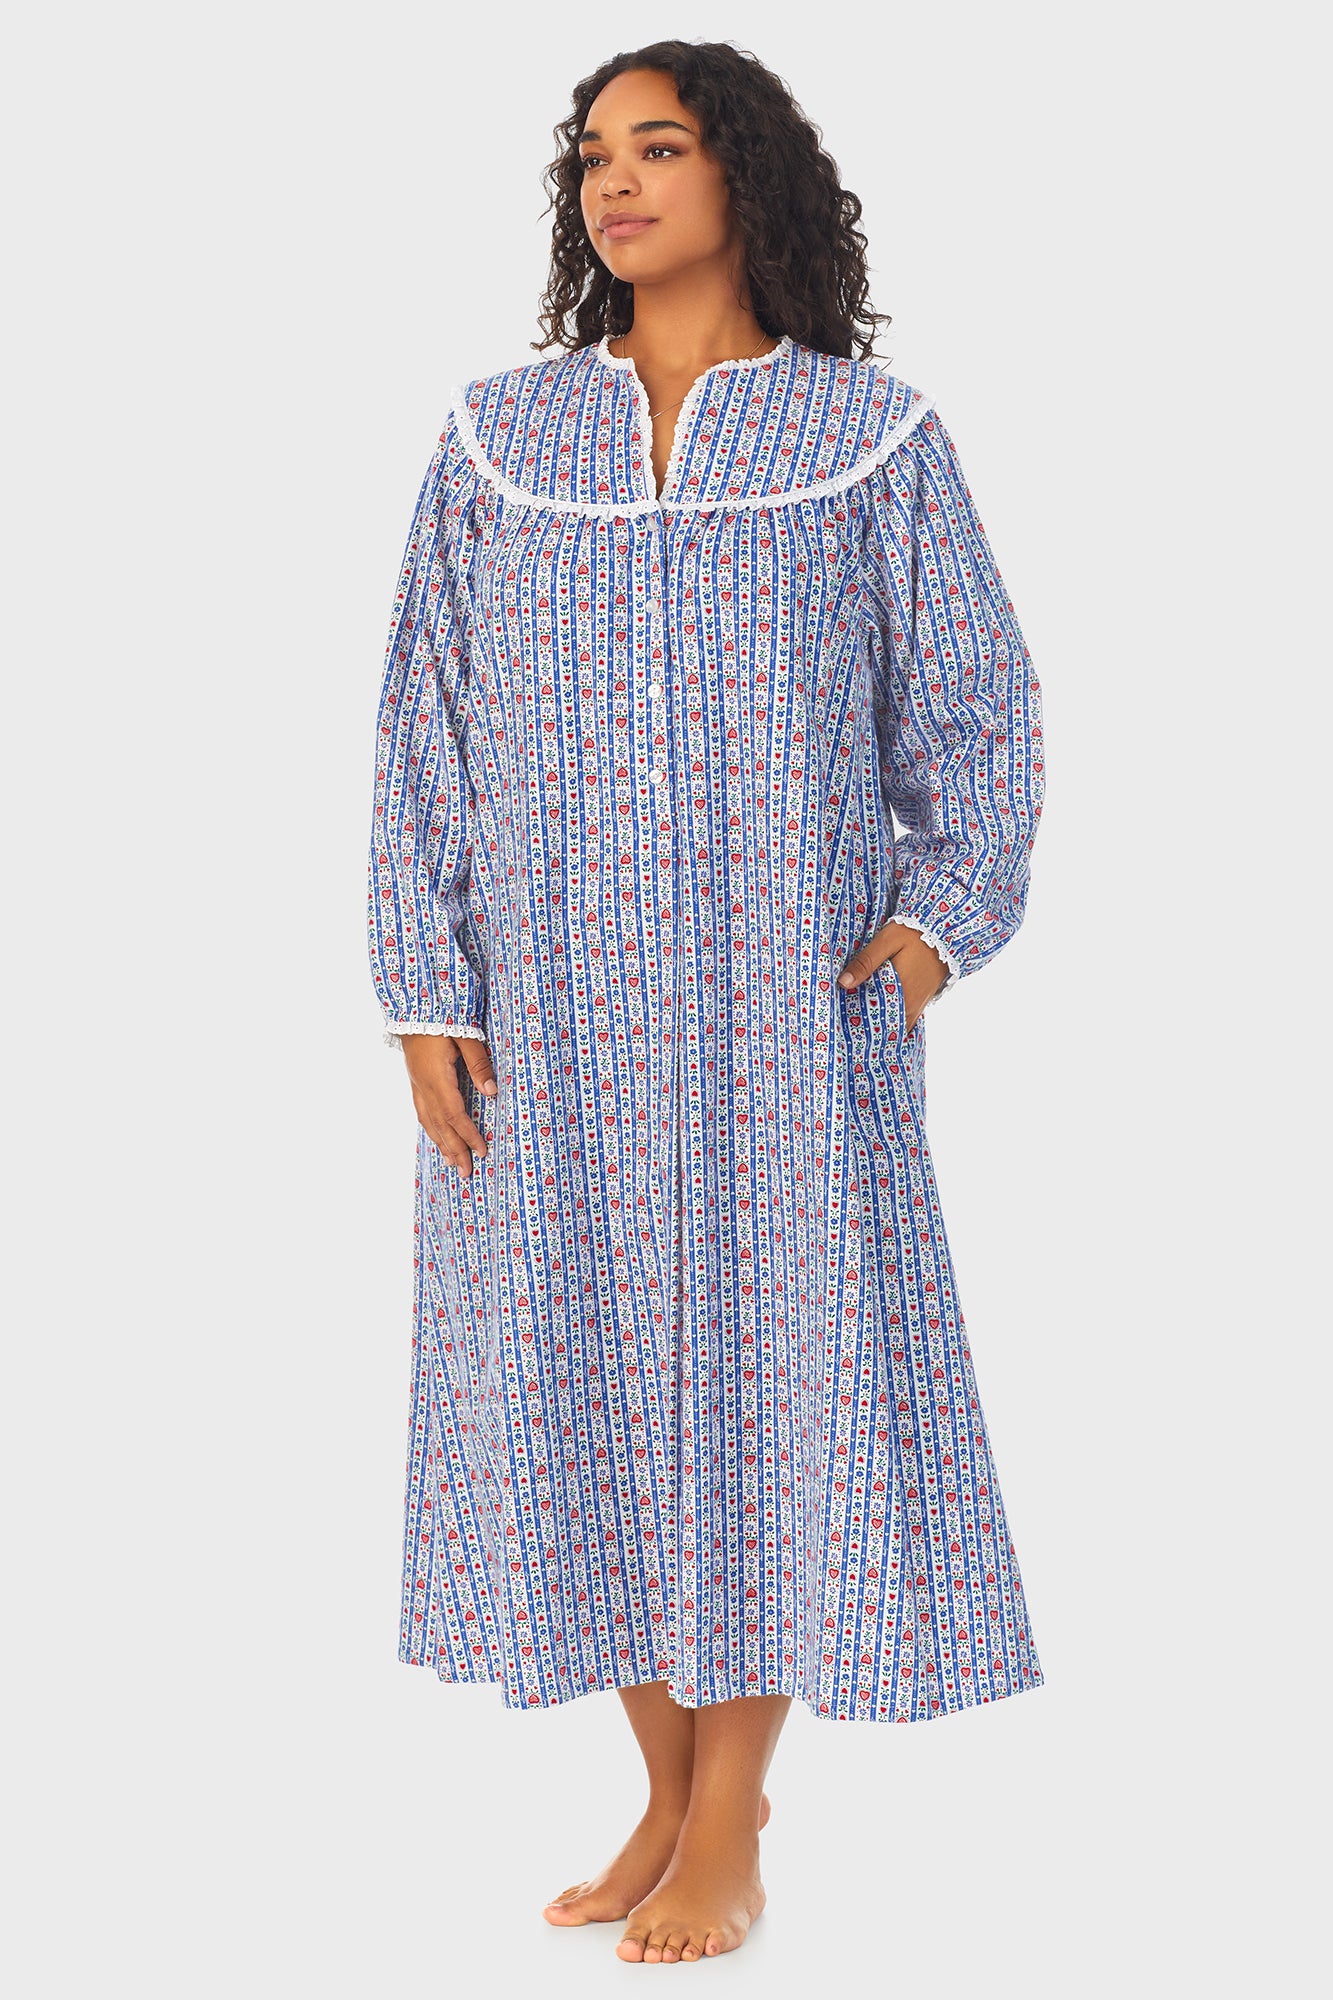  A lady wearing a blue long sleeve flannel nightgown plus with tyrolean stripe pattern.